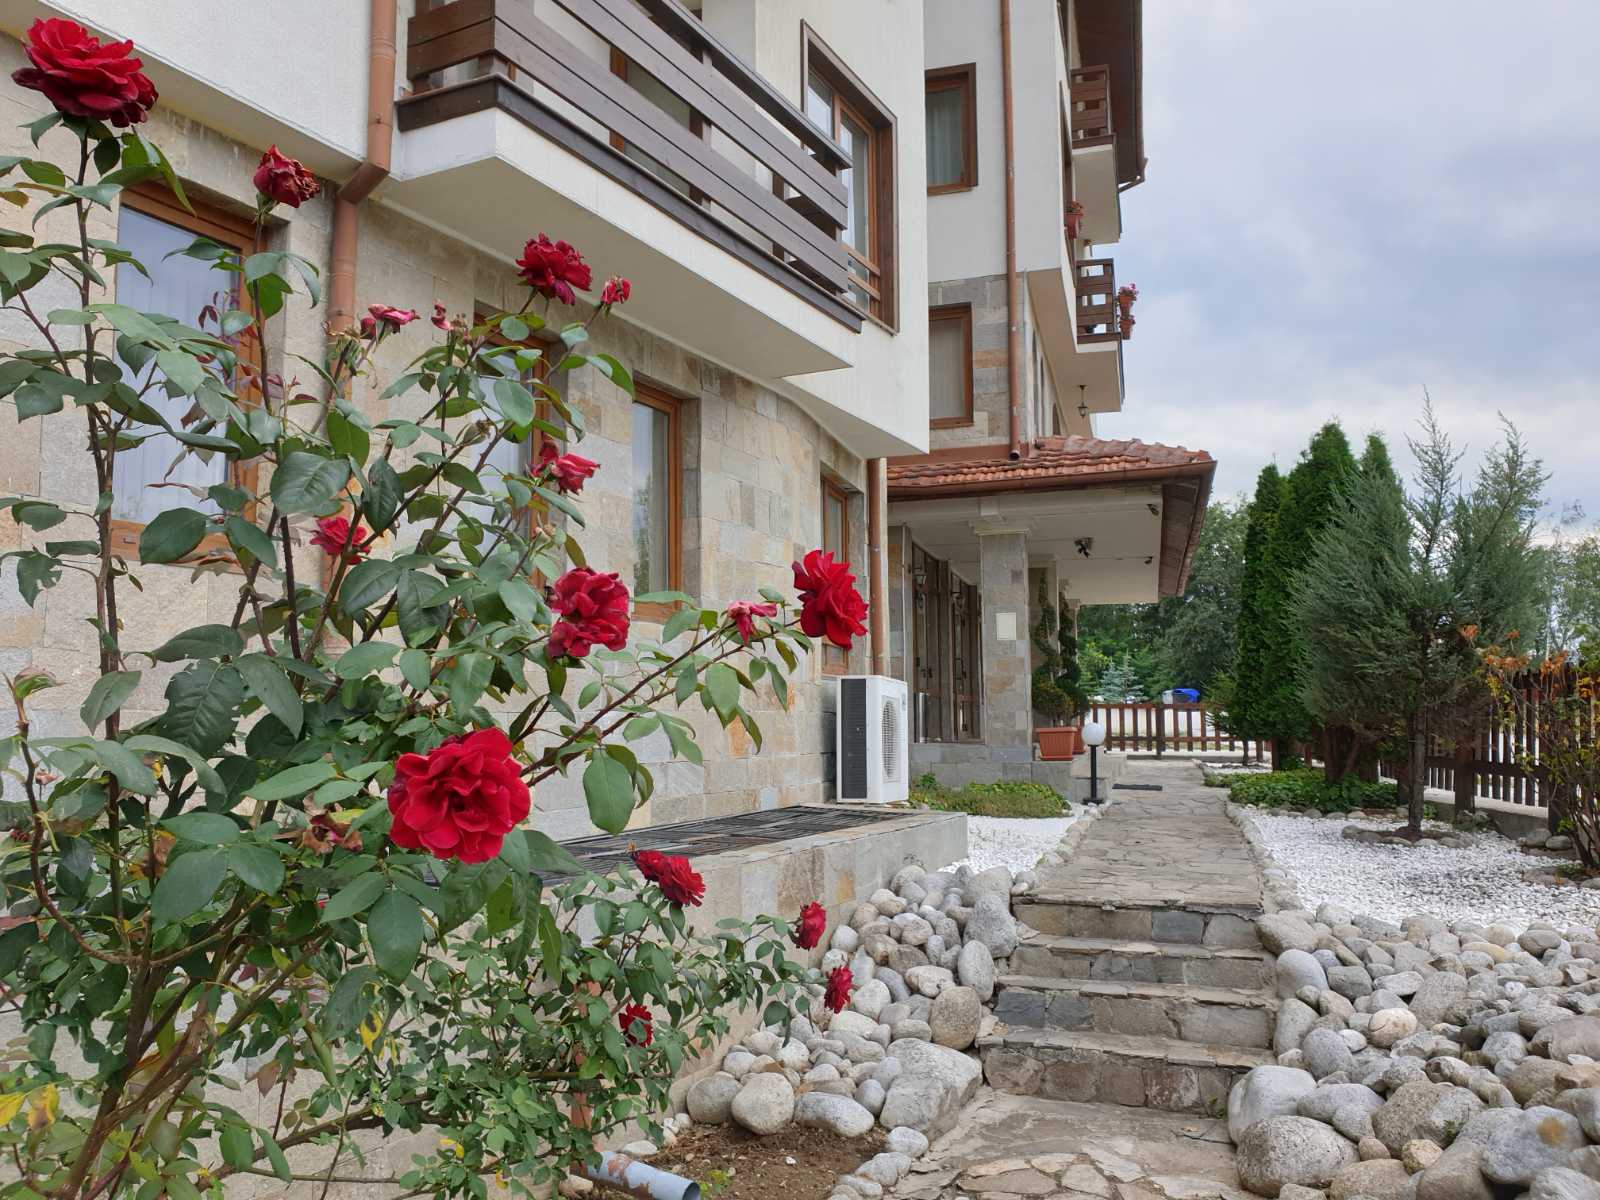 sunny one-bedroom apartment 5 minutes from the ski lift in bansko